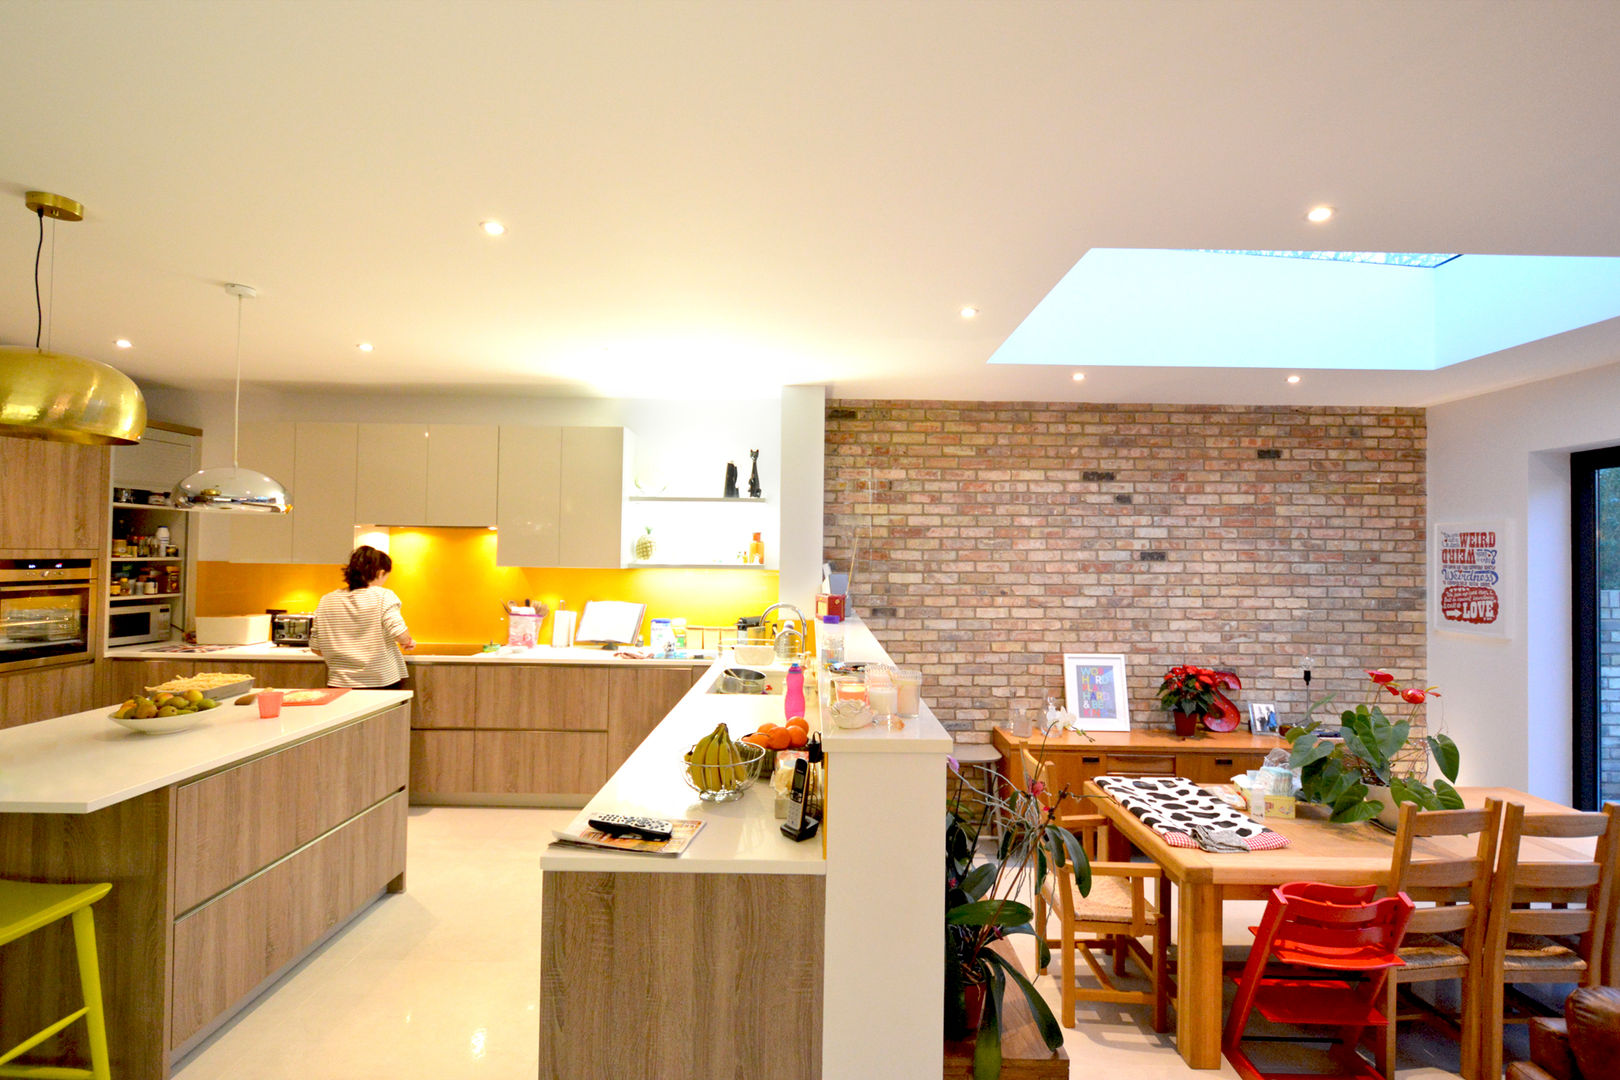 Grange Park, Enfield N21 | House extension GOAStudio London residential architecture limited モダンな キッチン